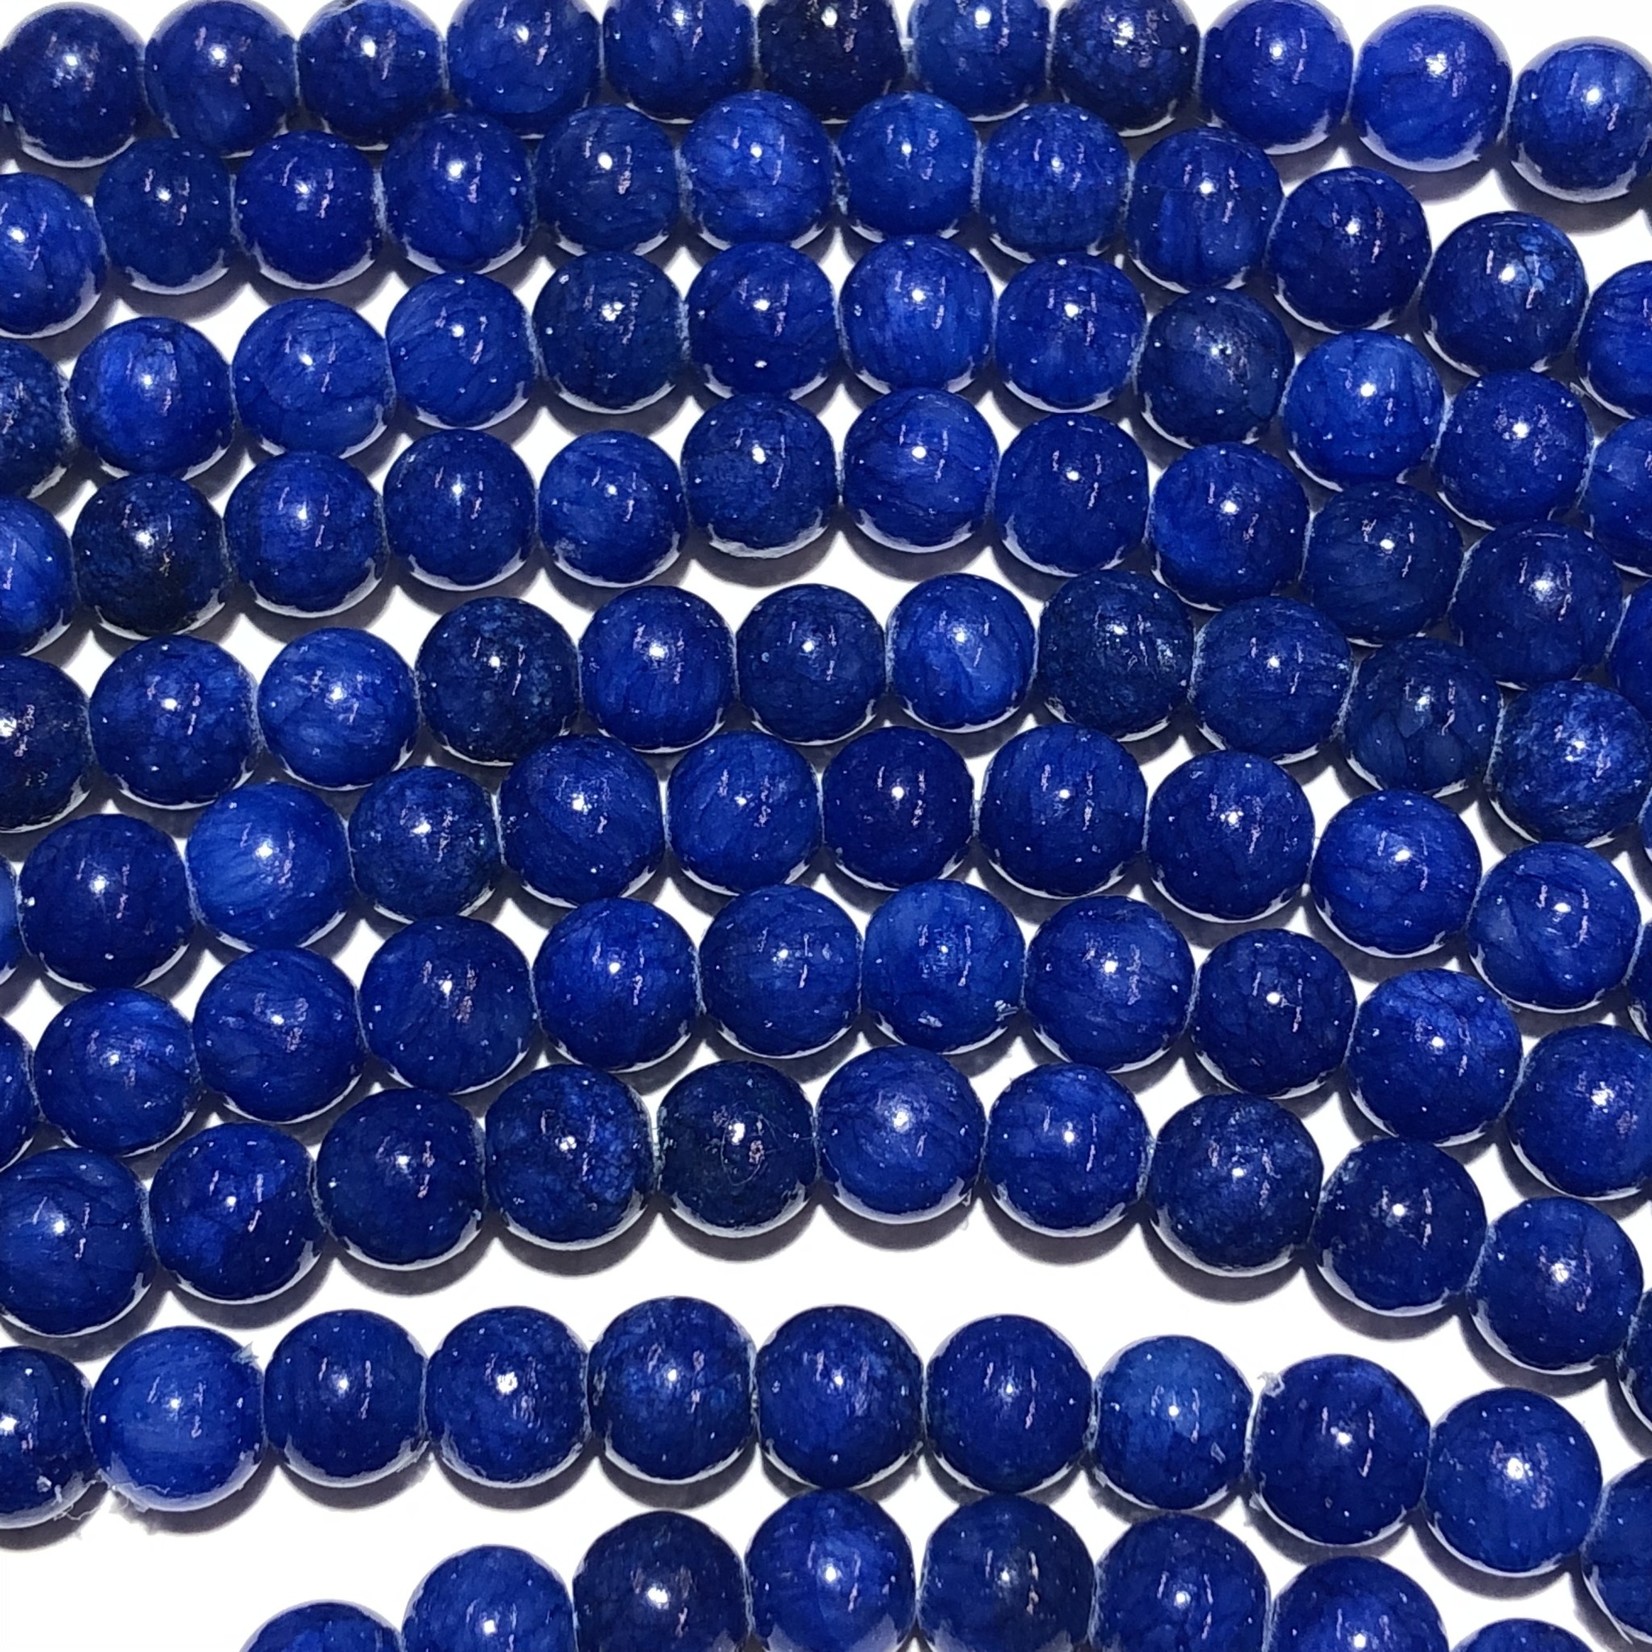 Common JADE Dyed Royal Blue 6mm Round